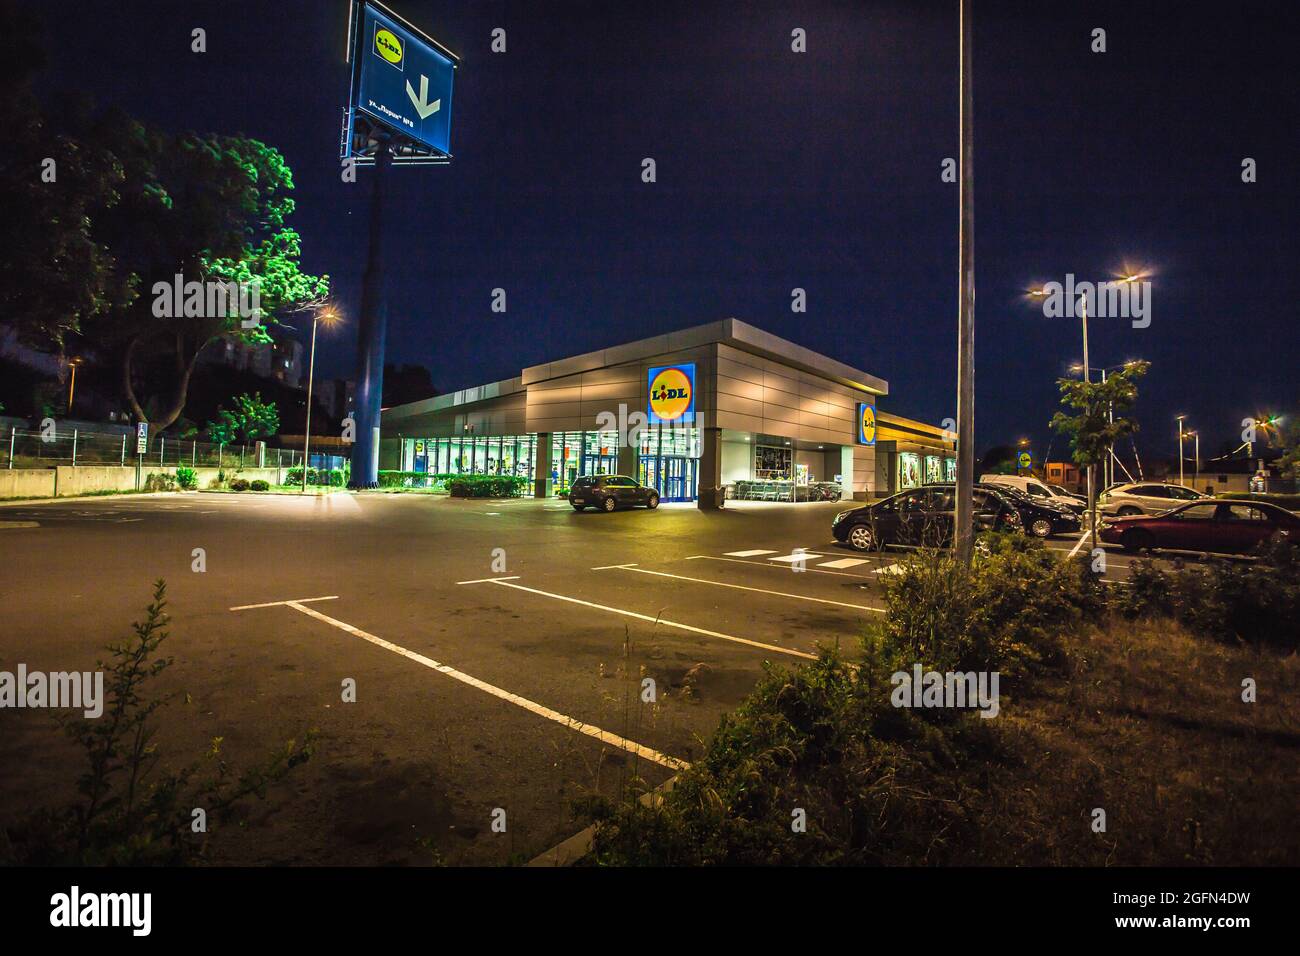 View of Lidl supermarket and logo in the night.Lidl Stiftung & Co. KG is a German global discount supermarket chain,operating in 26 European countries Stock Photo